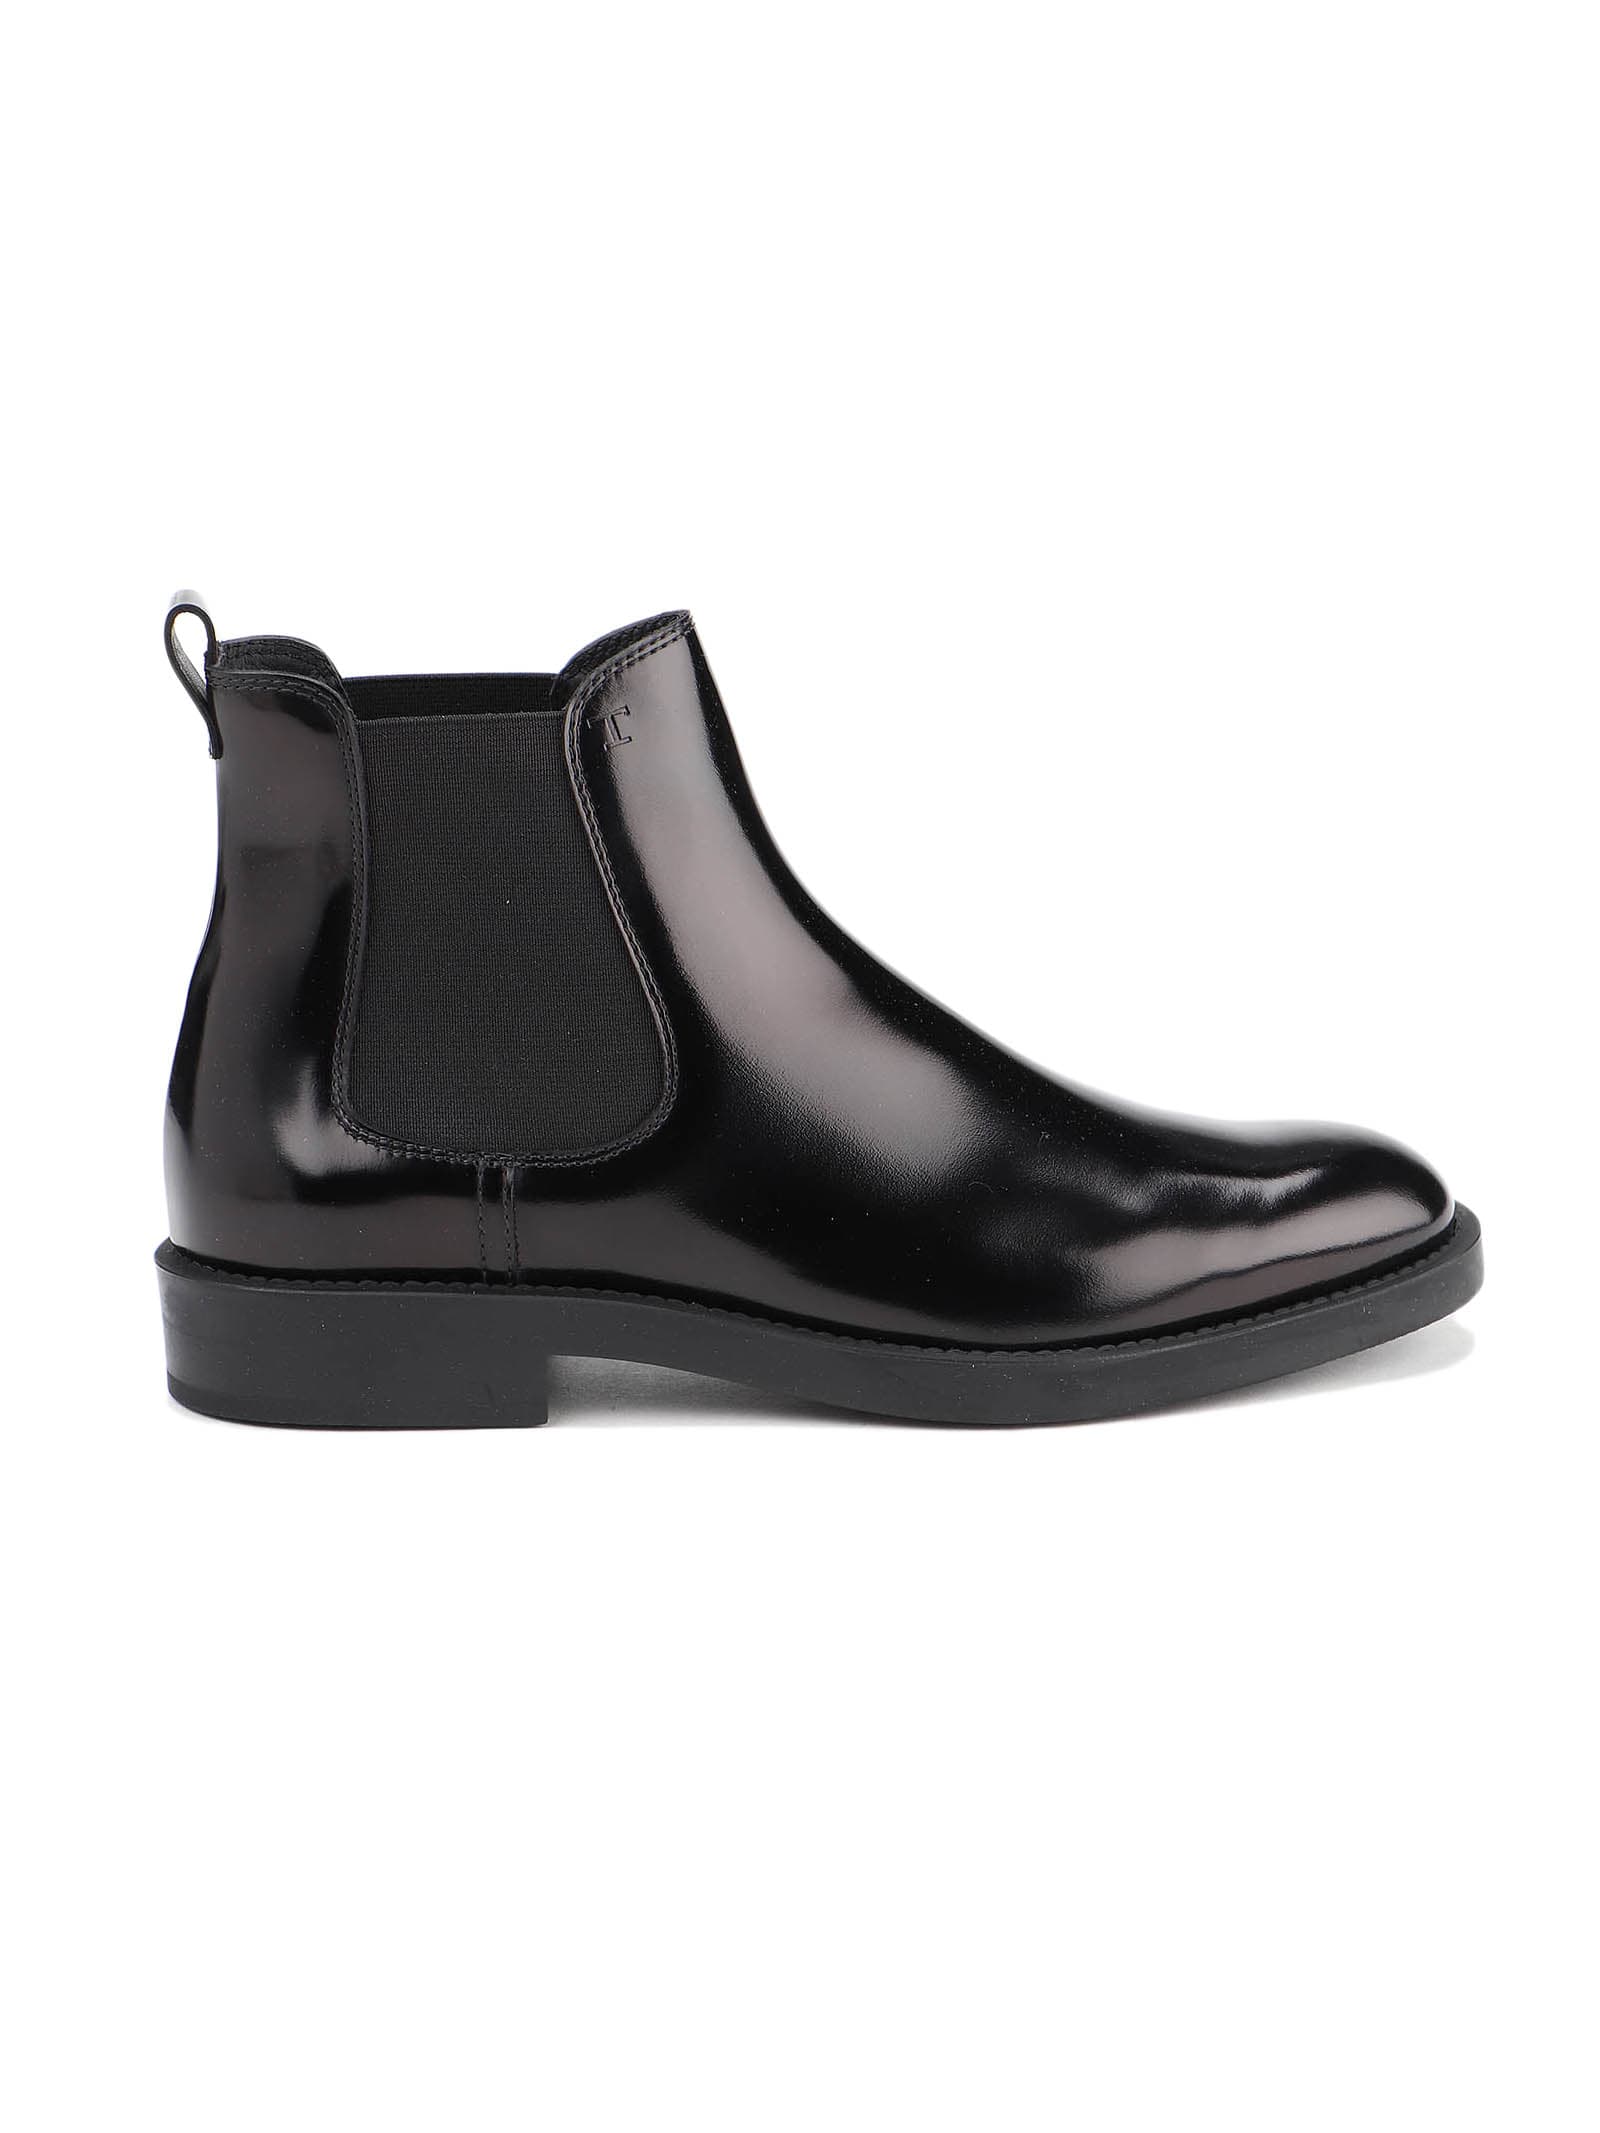 Buy Tods Ankle Boot online, shop Tods shoes with free shipping